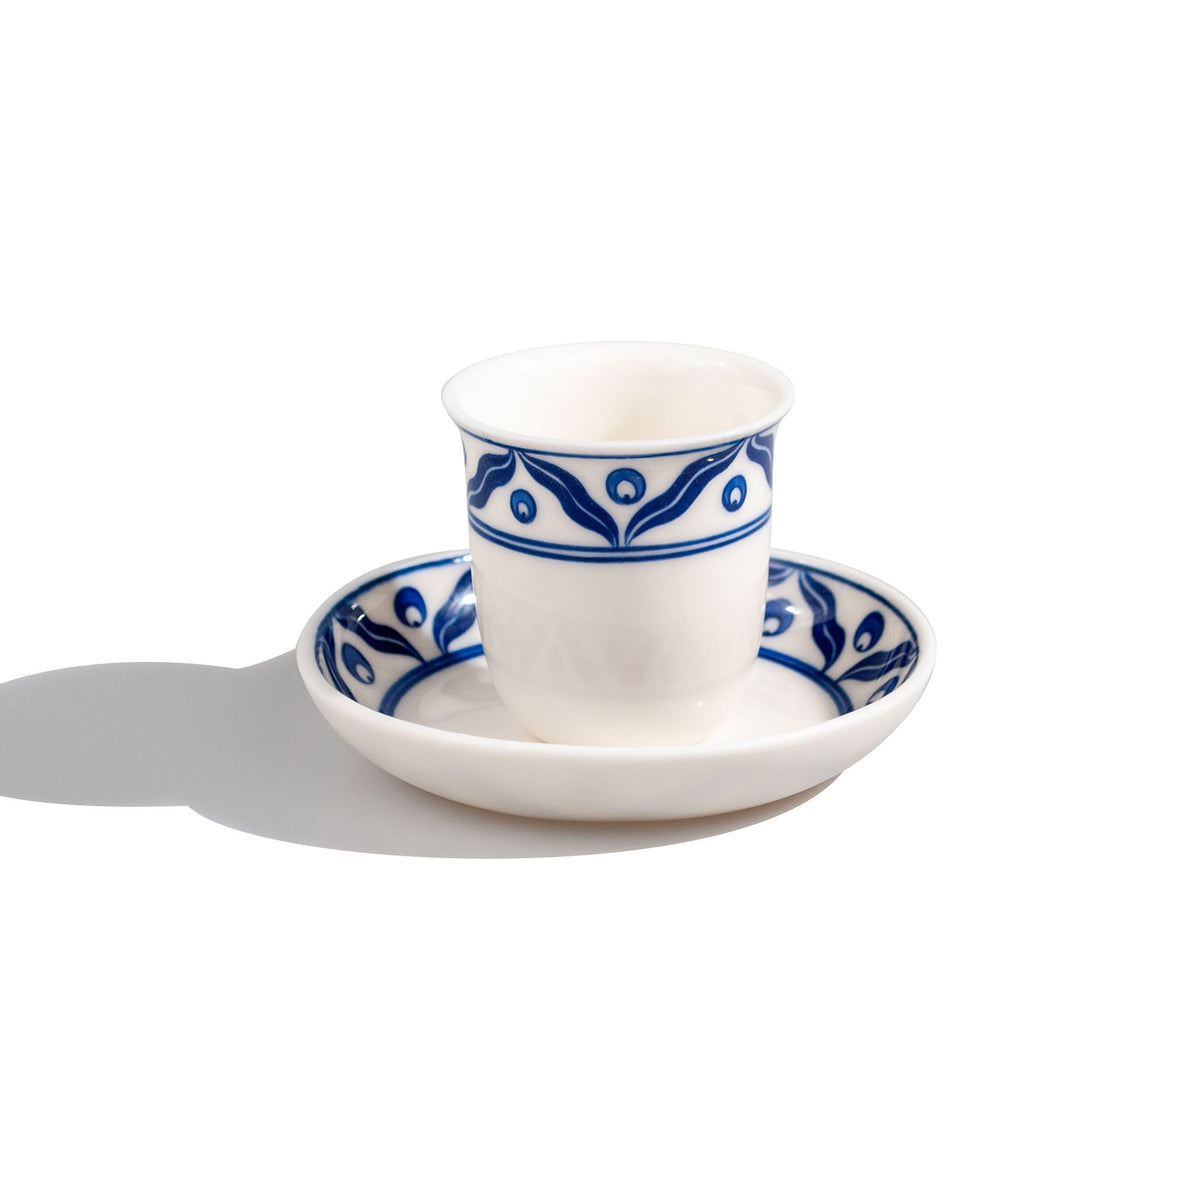 Cintemani pattern blue-white transparent turkish coffee porcelain cup and plate.